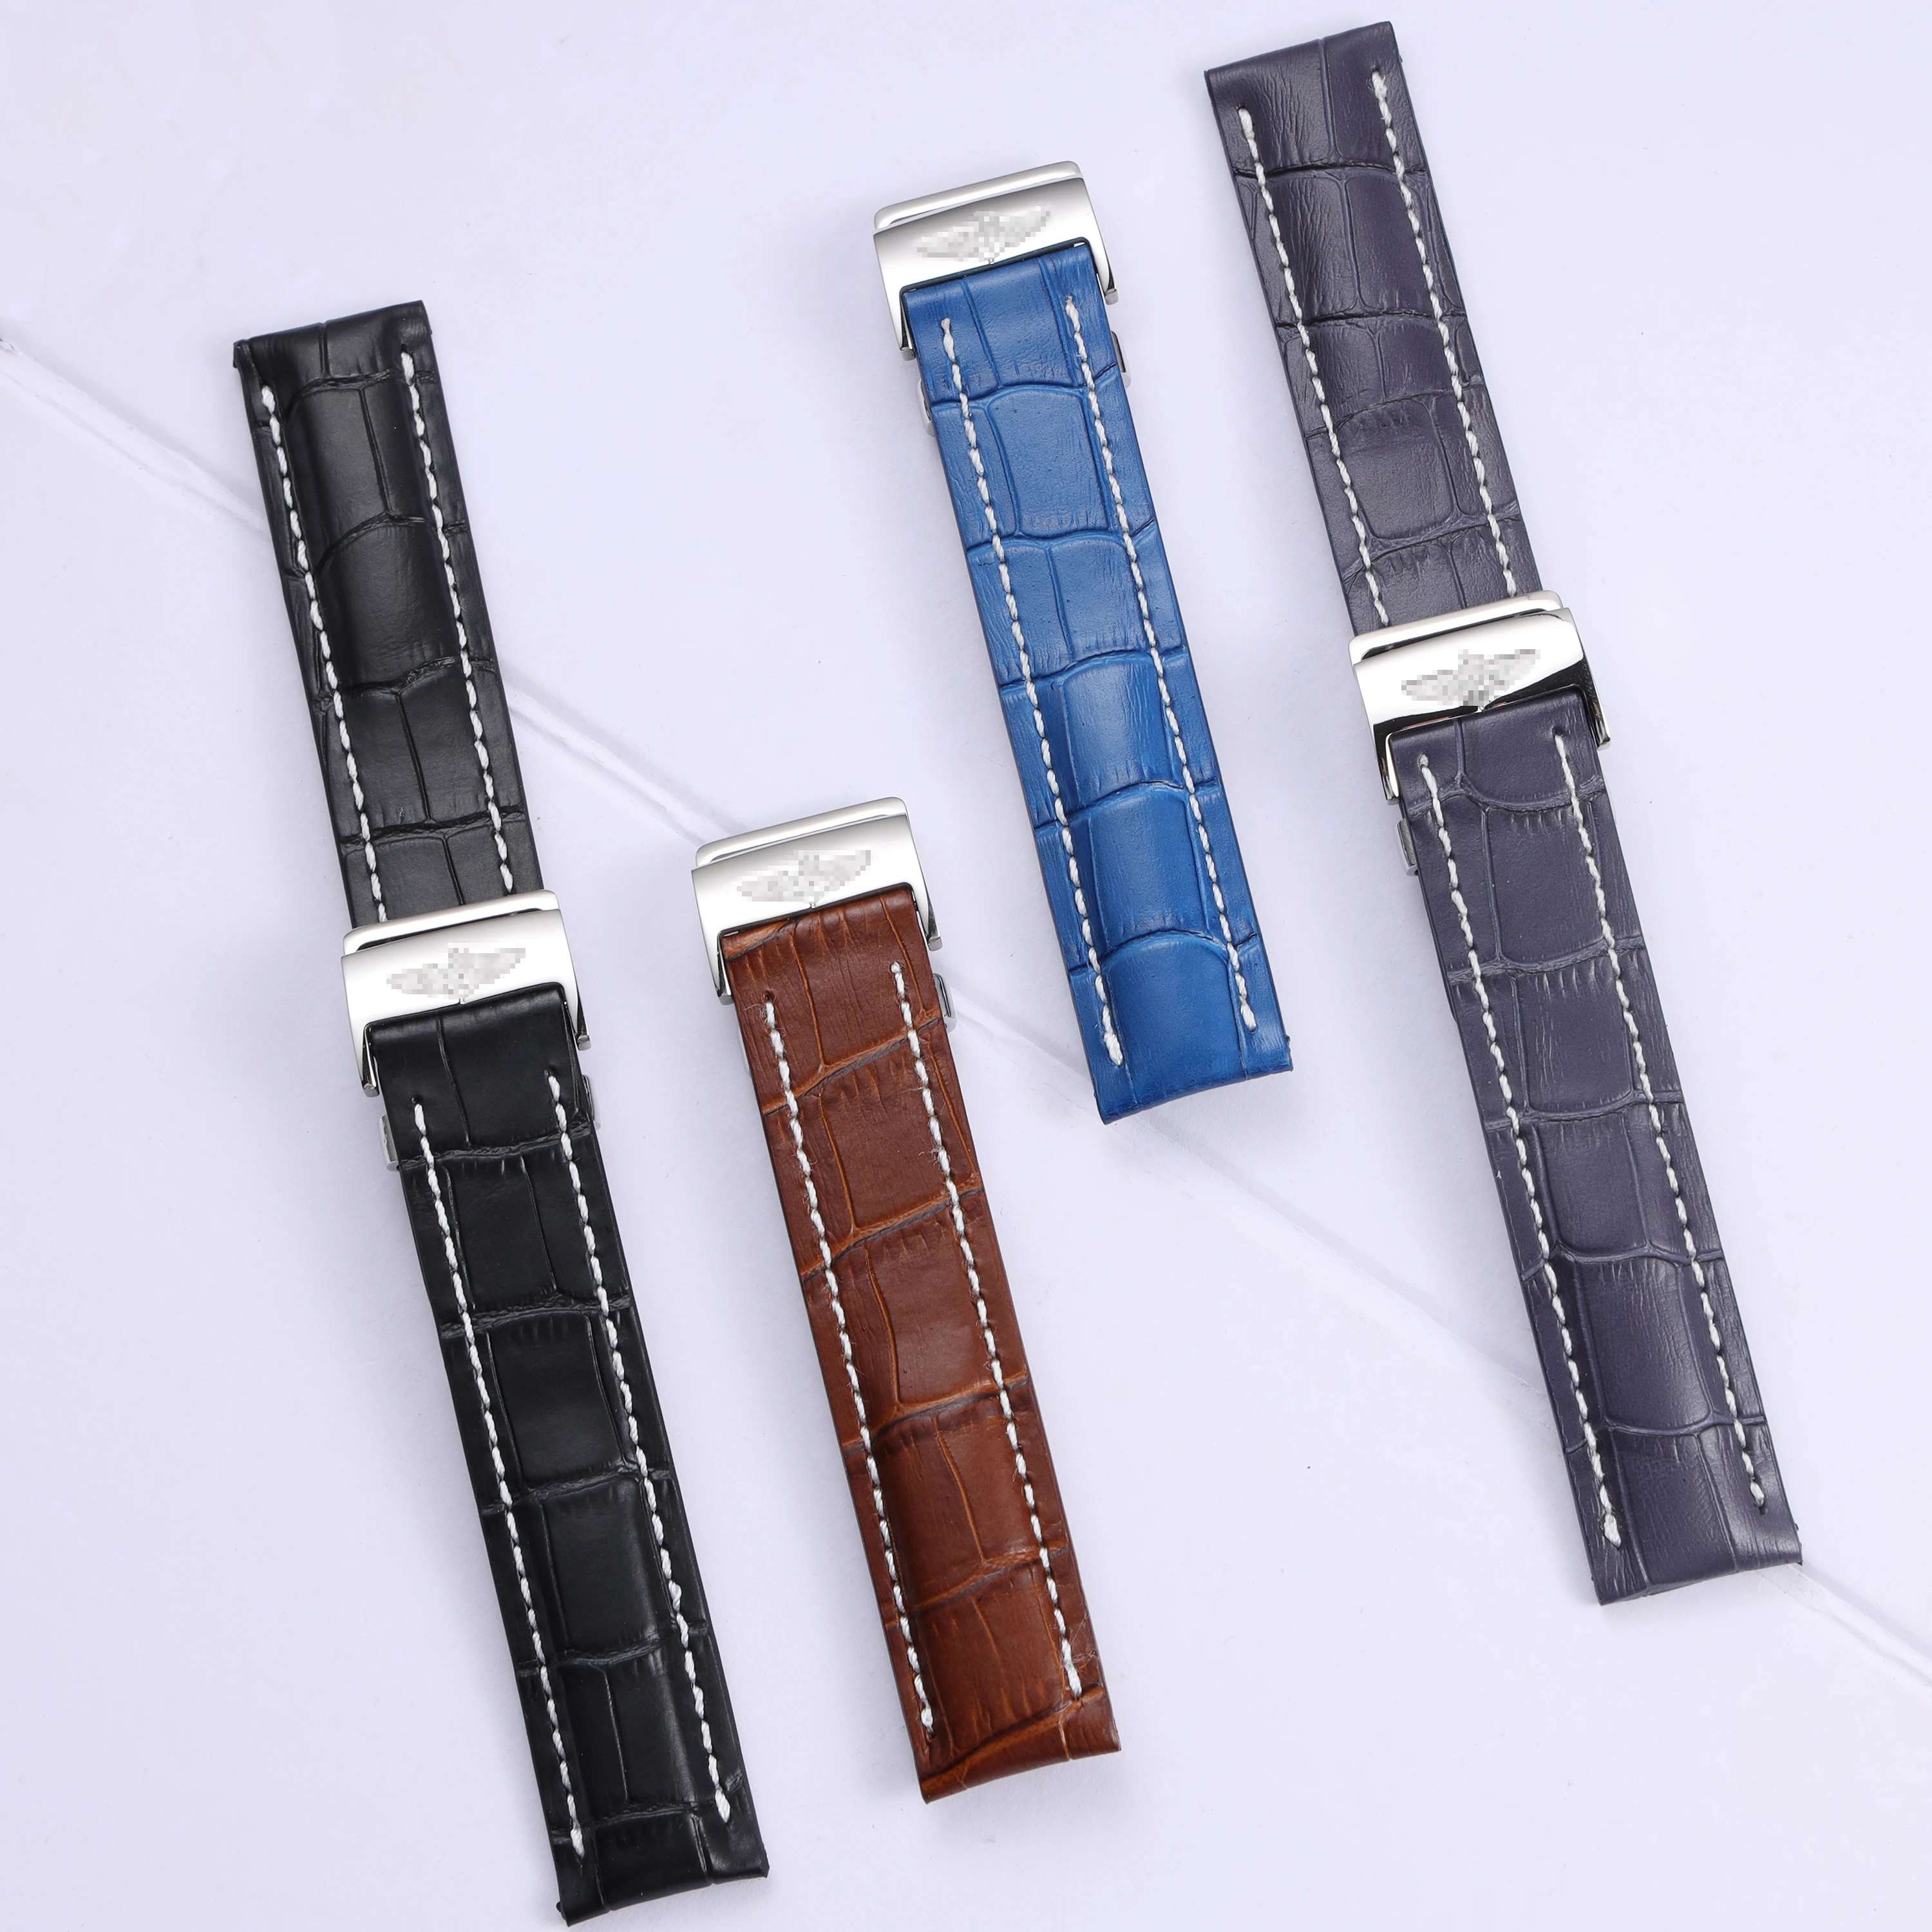 

20 22 24mm full wing logo buckle black blue brown genuine leather watchband for Breitling strap replacement deployment clasp